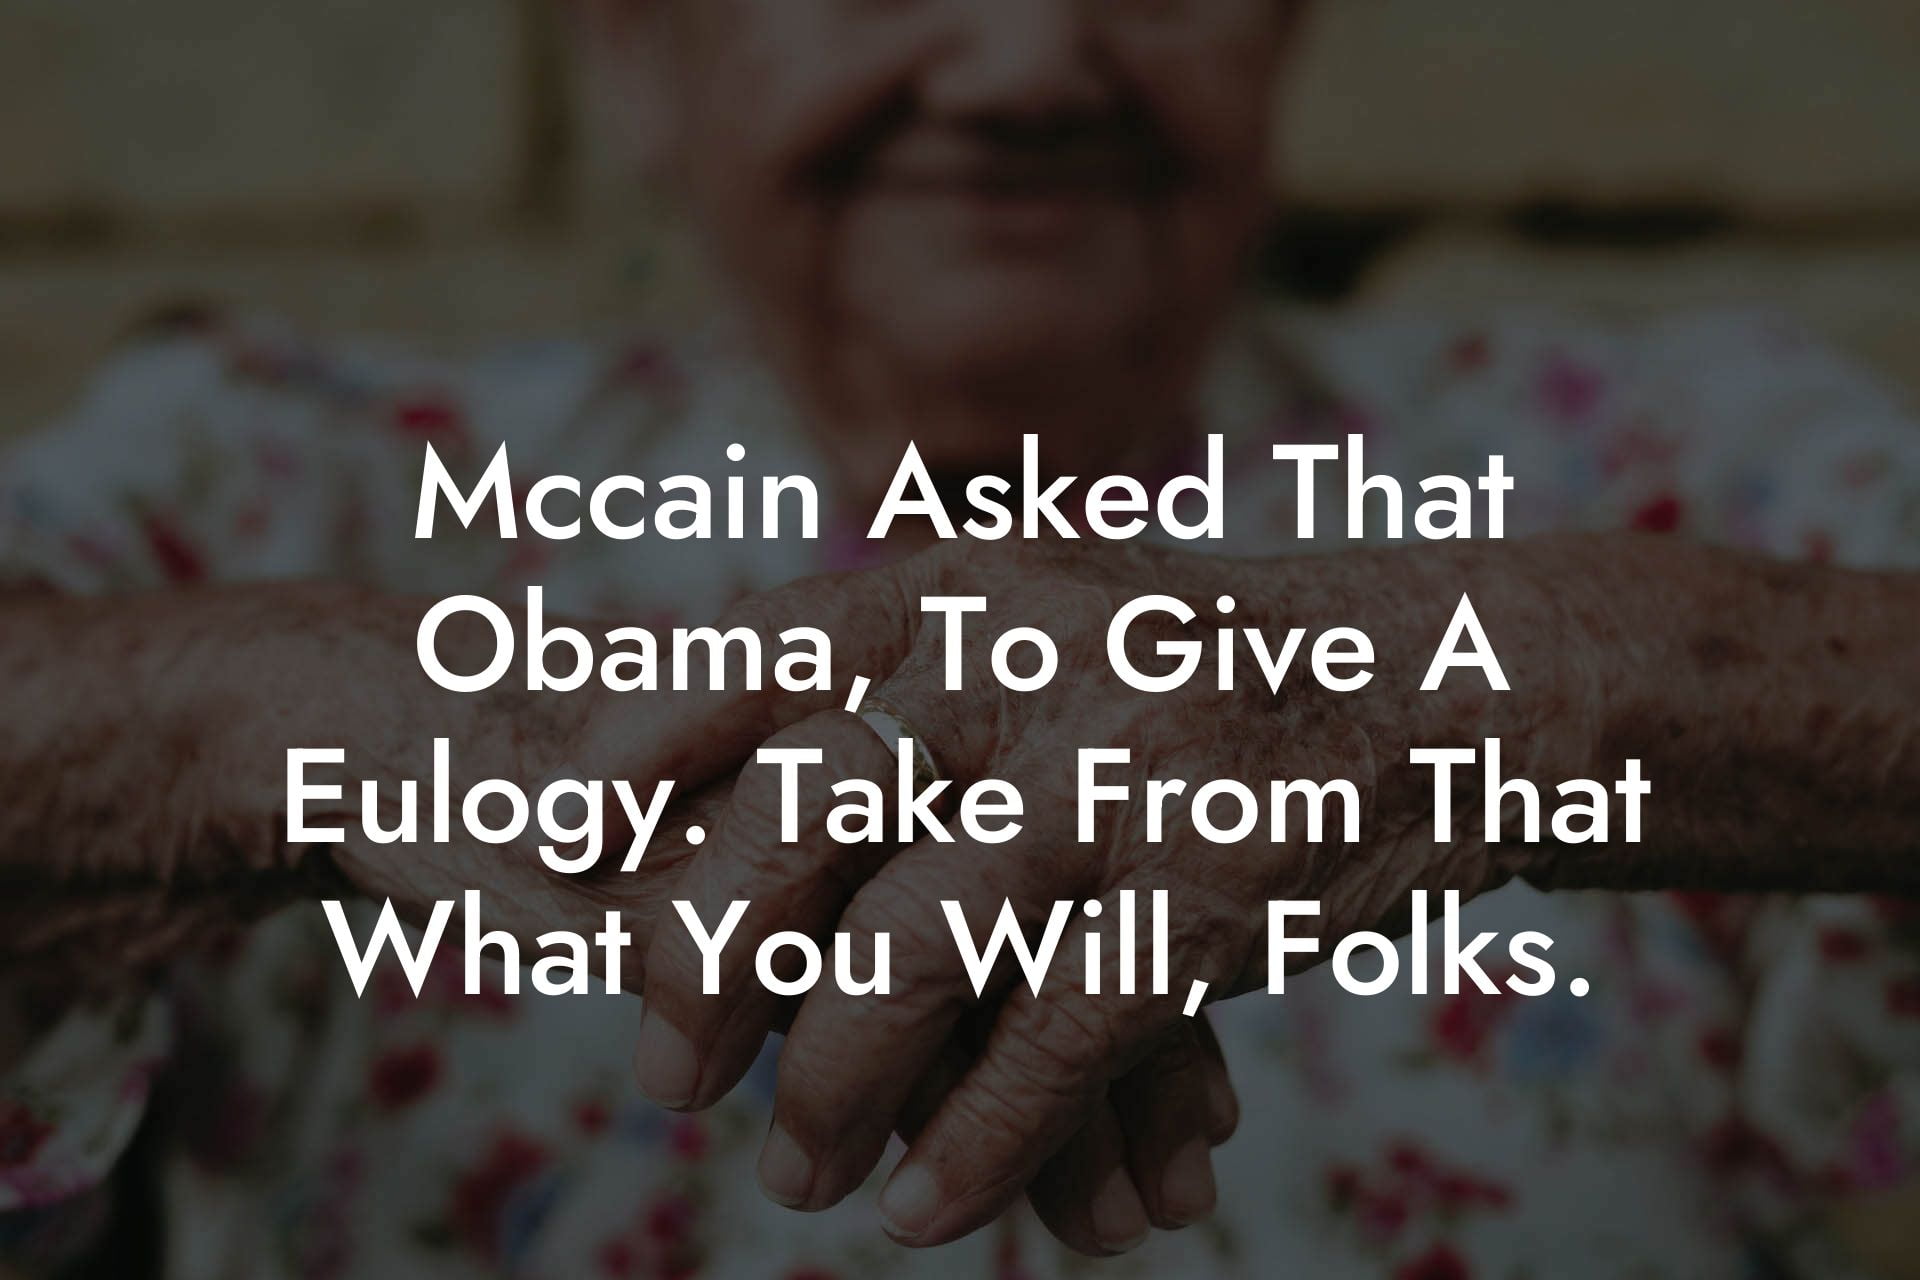 Mccain Asked That Obama, To Give A Eulogy. Take From That What You Will, Folks.